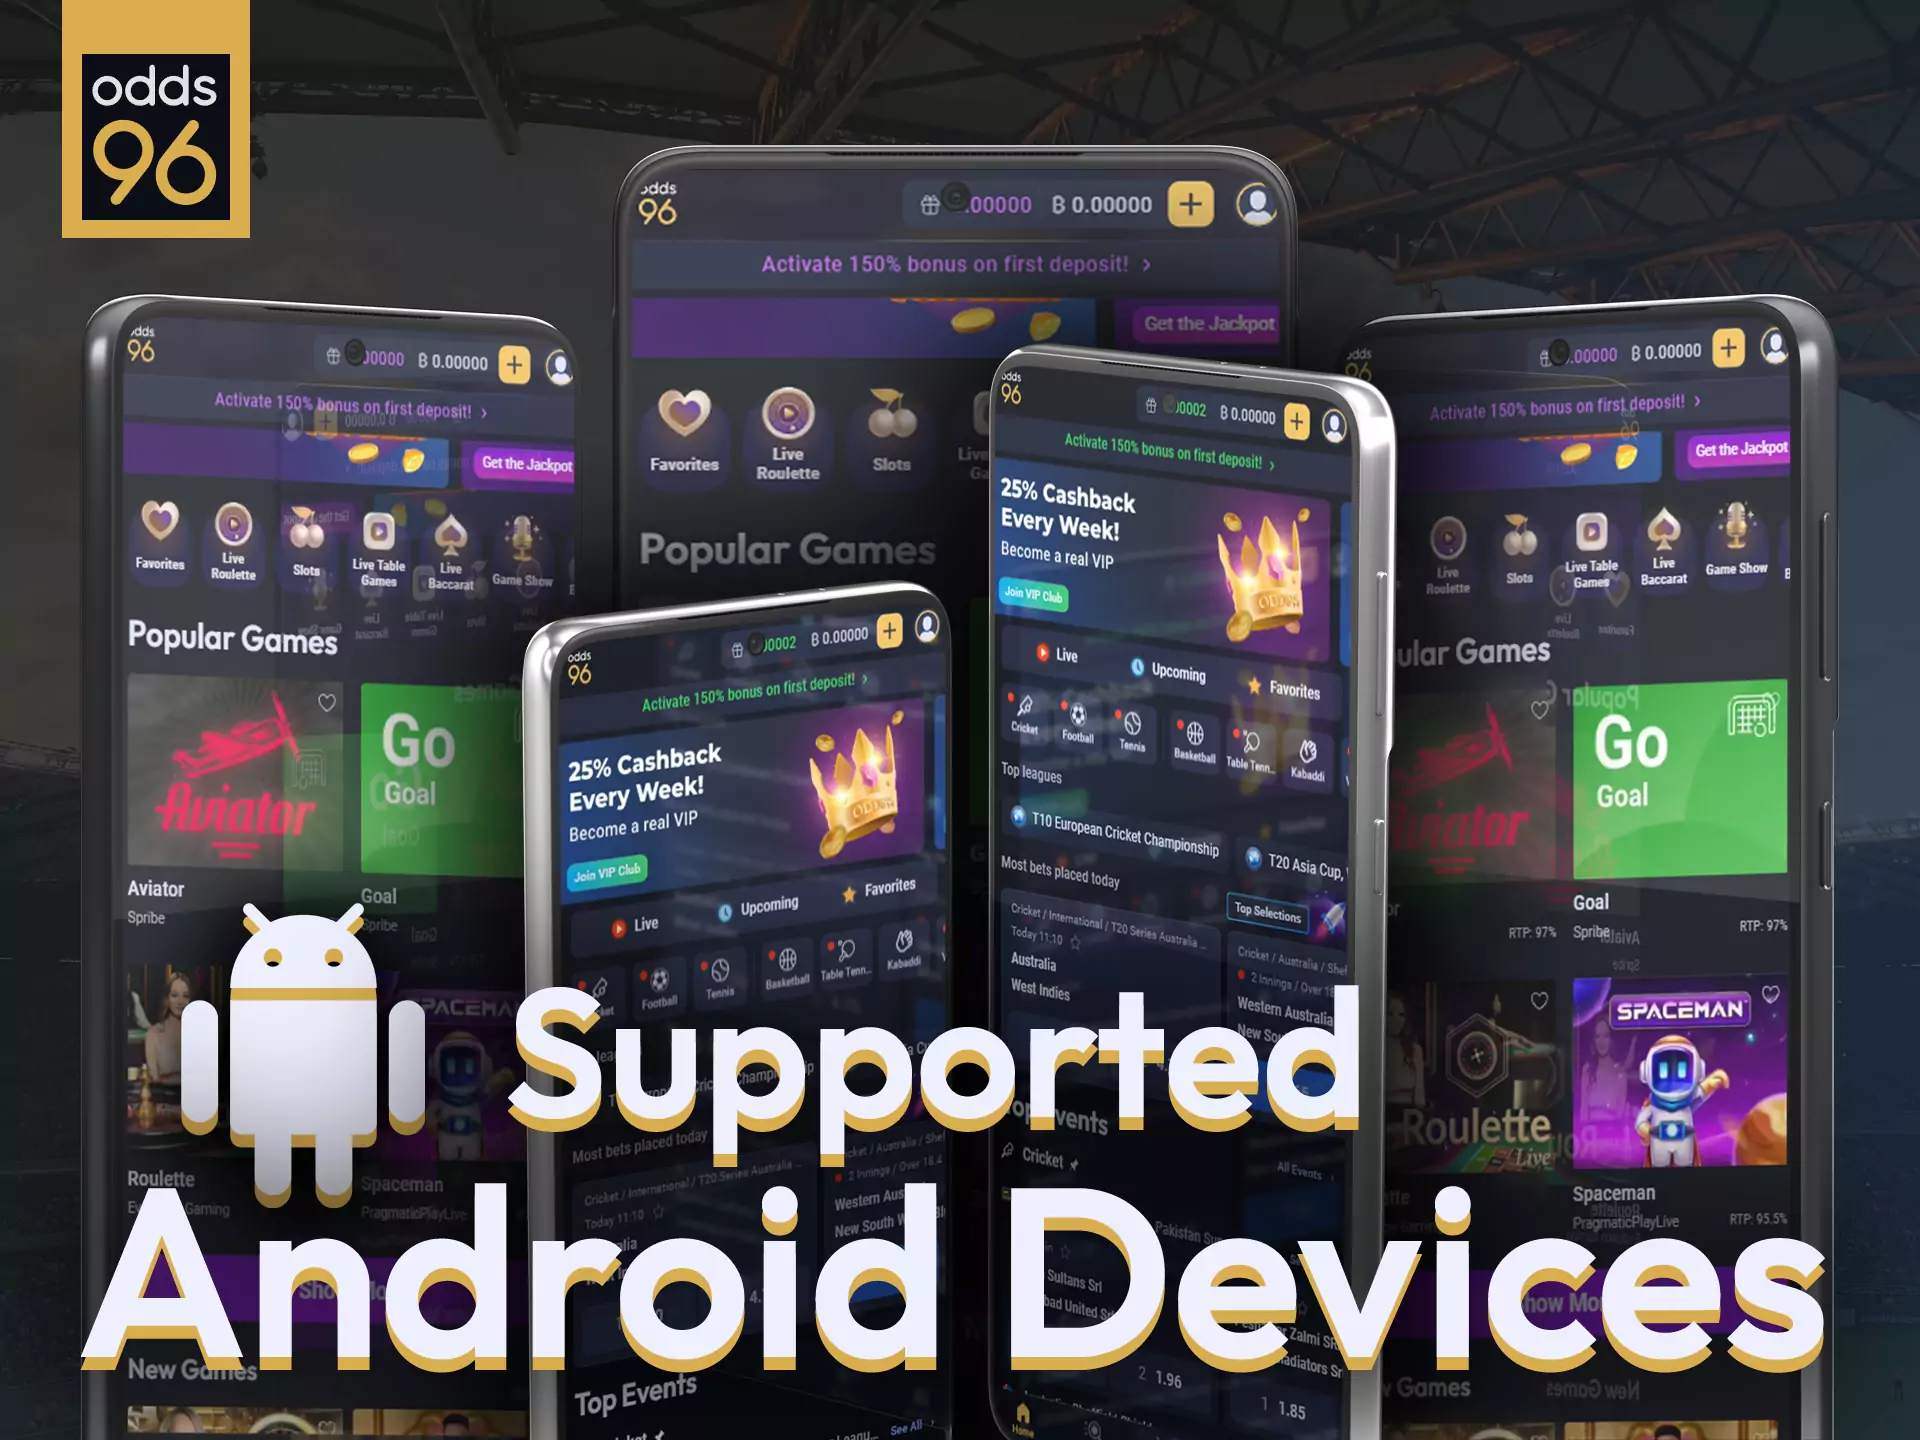 The Odds96 app is supported on a variety of Android devices.